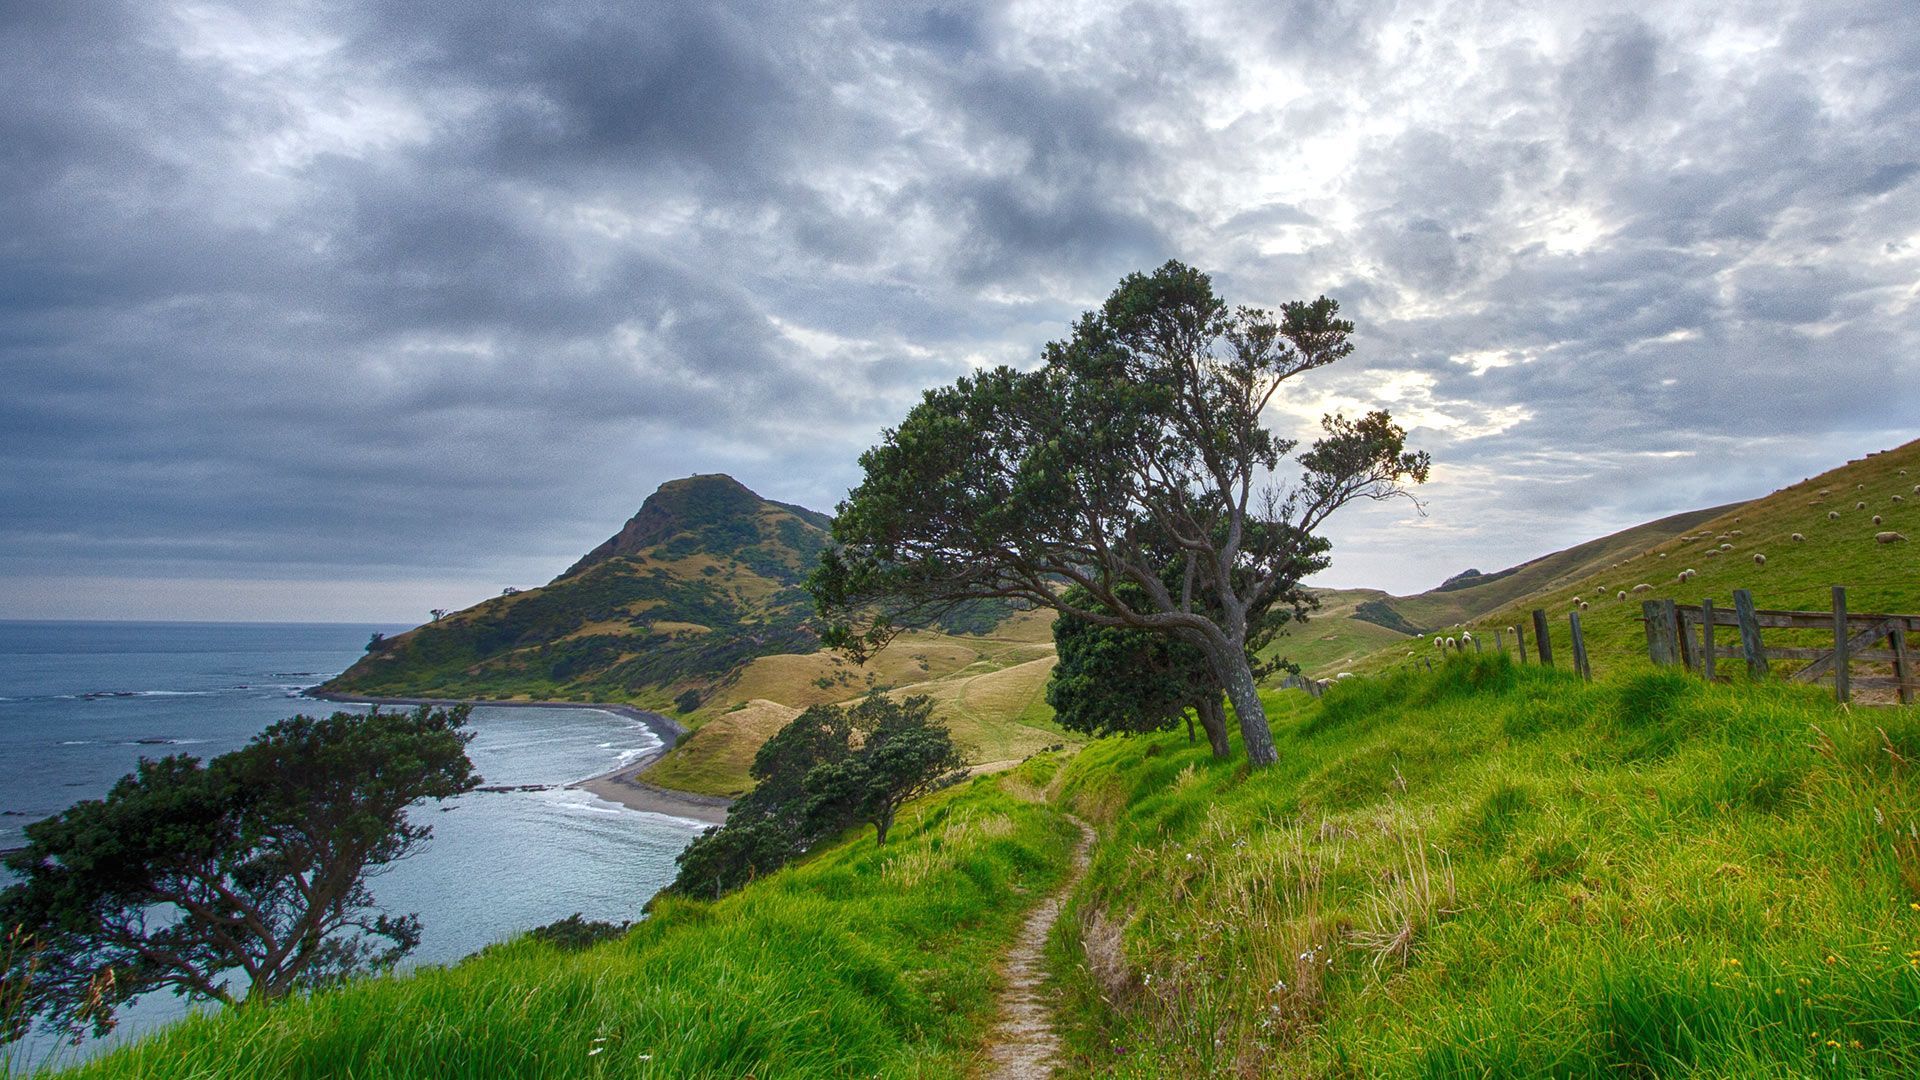 New zealand scenery wallpapers Free full hd wallpapers for 1080p